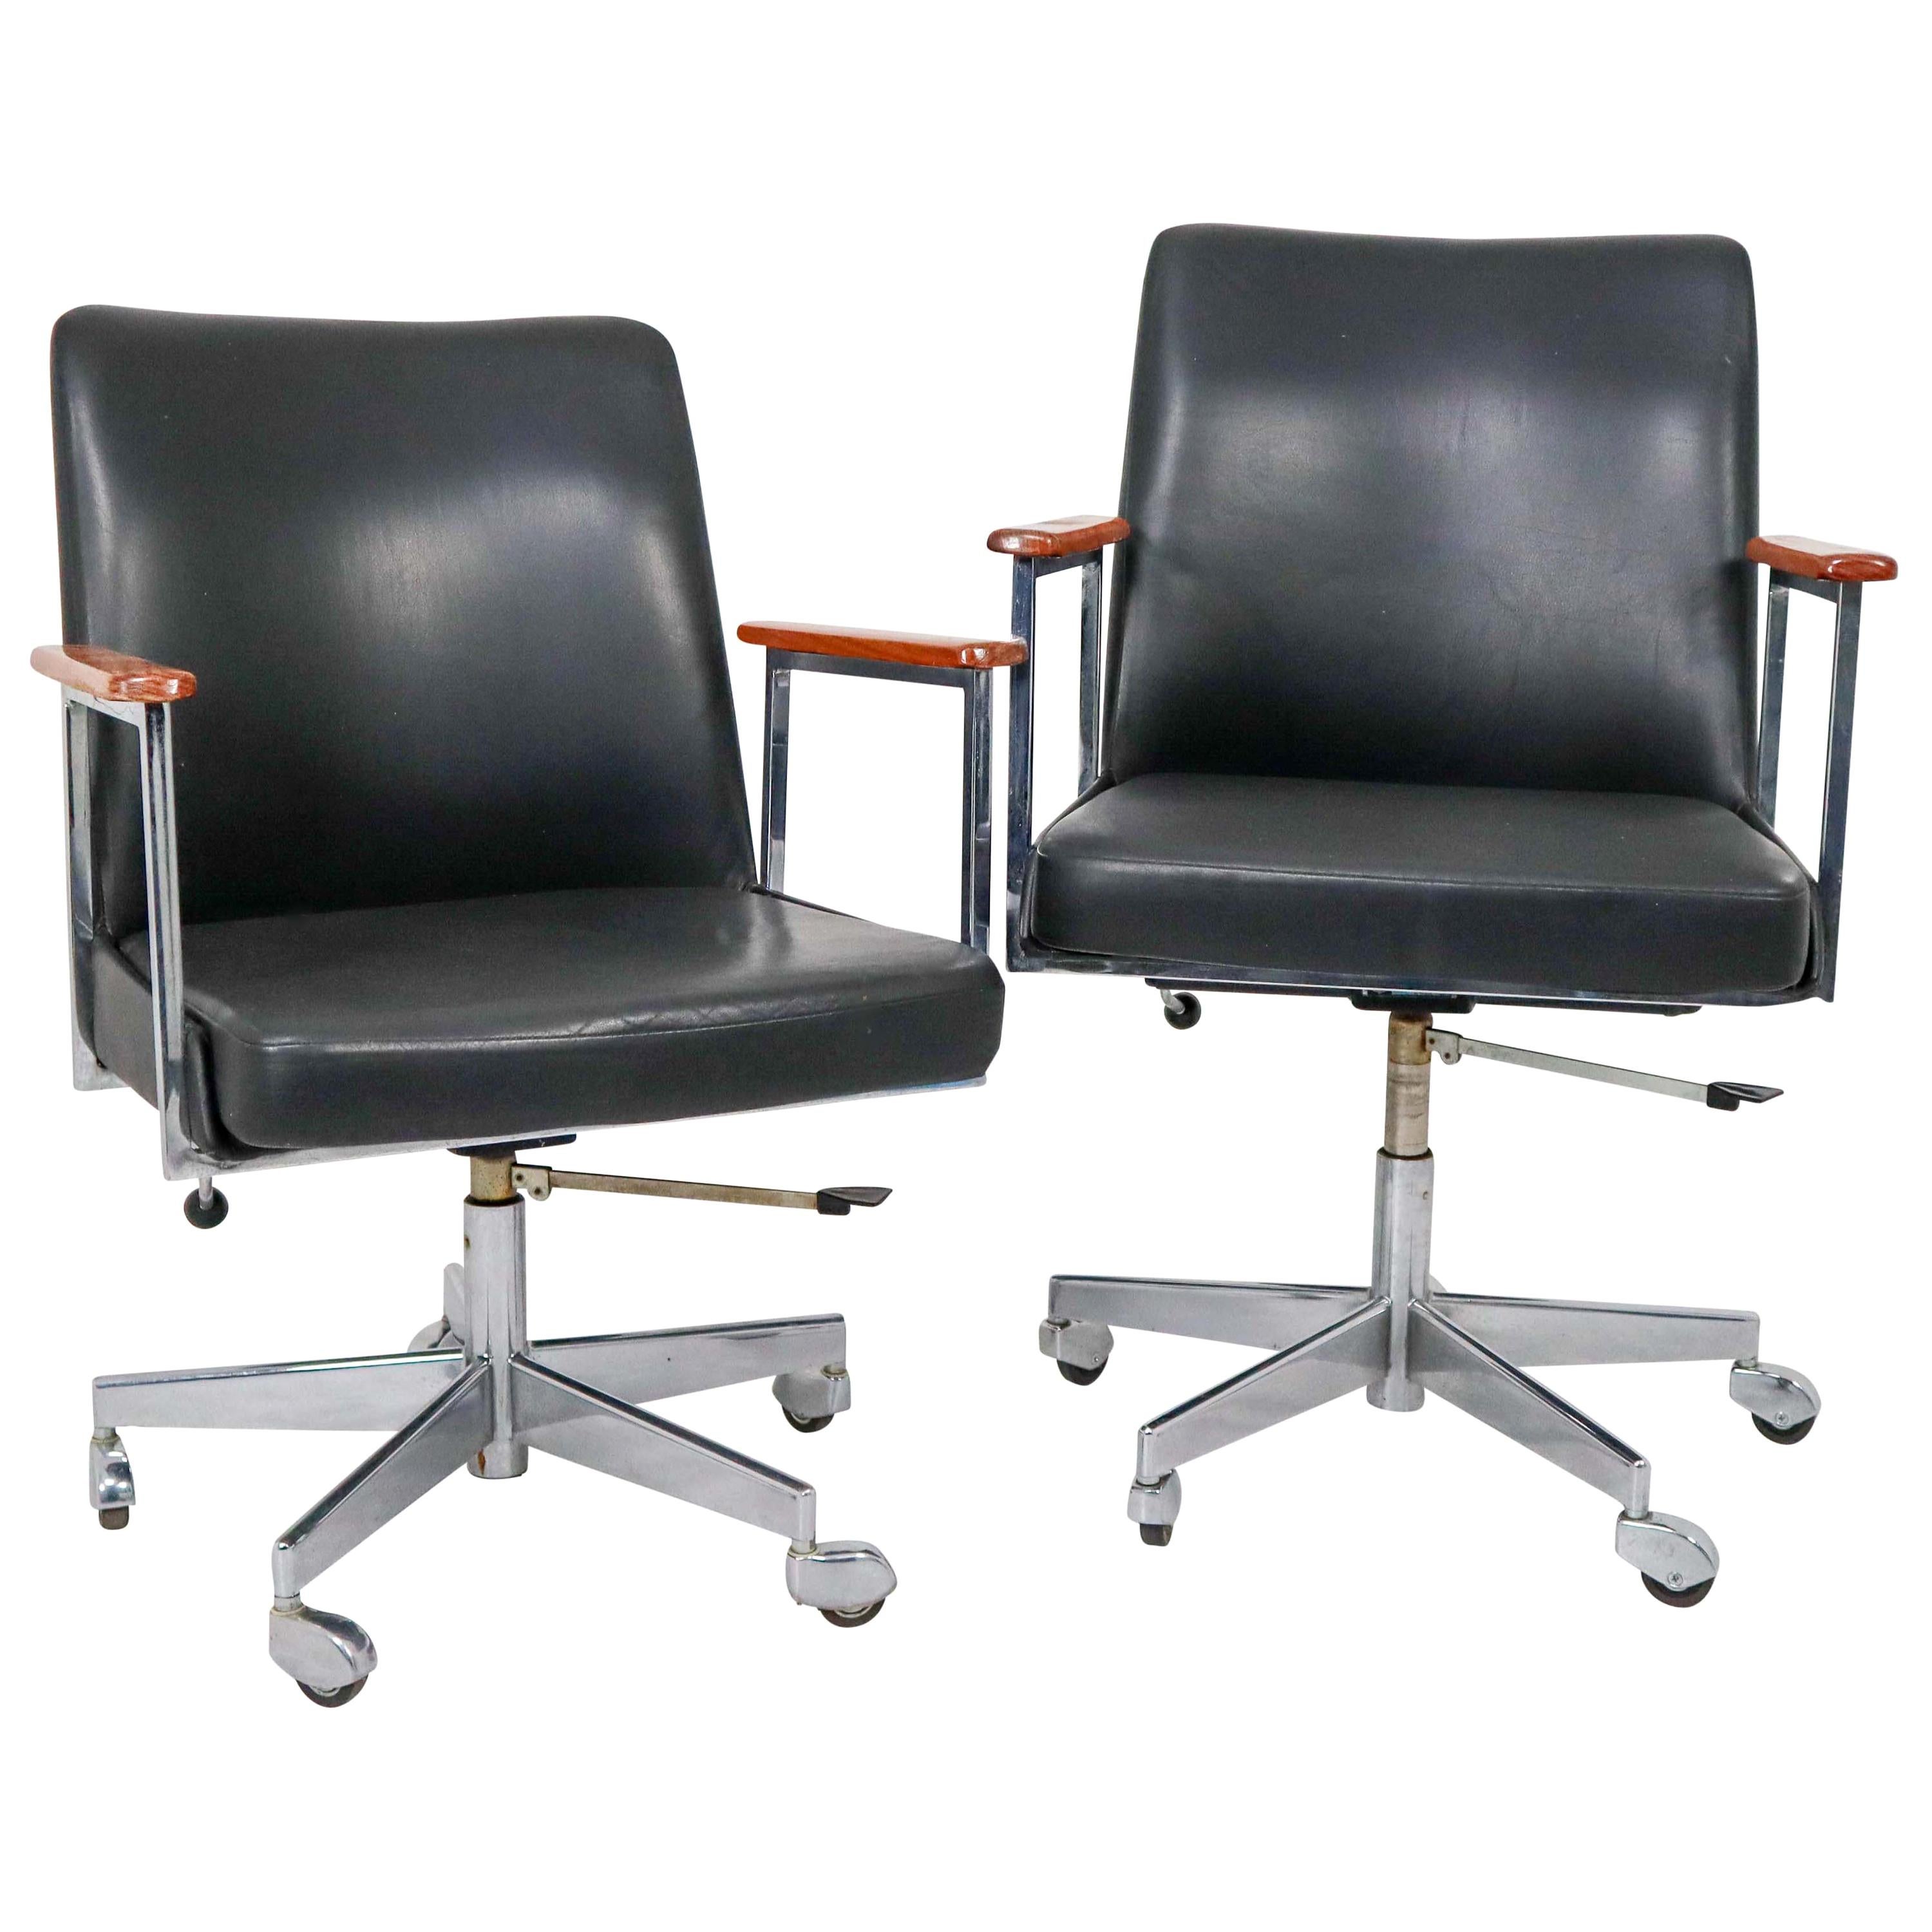 Mid-Century Modern Black Leather Office Armchairs Manufactured by Mauser 1960s